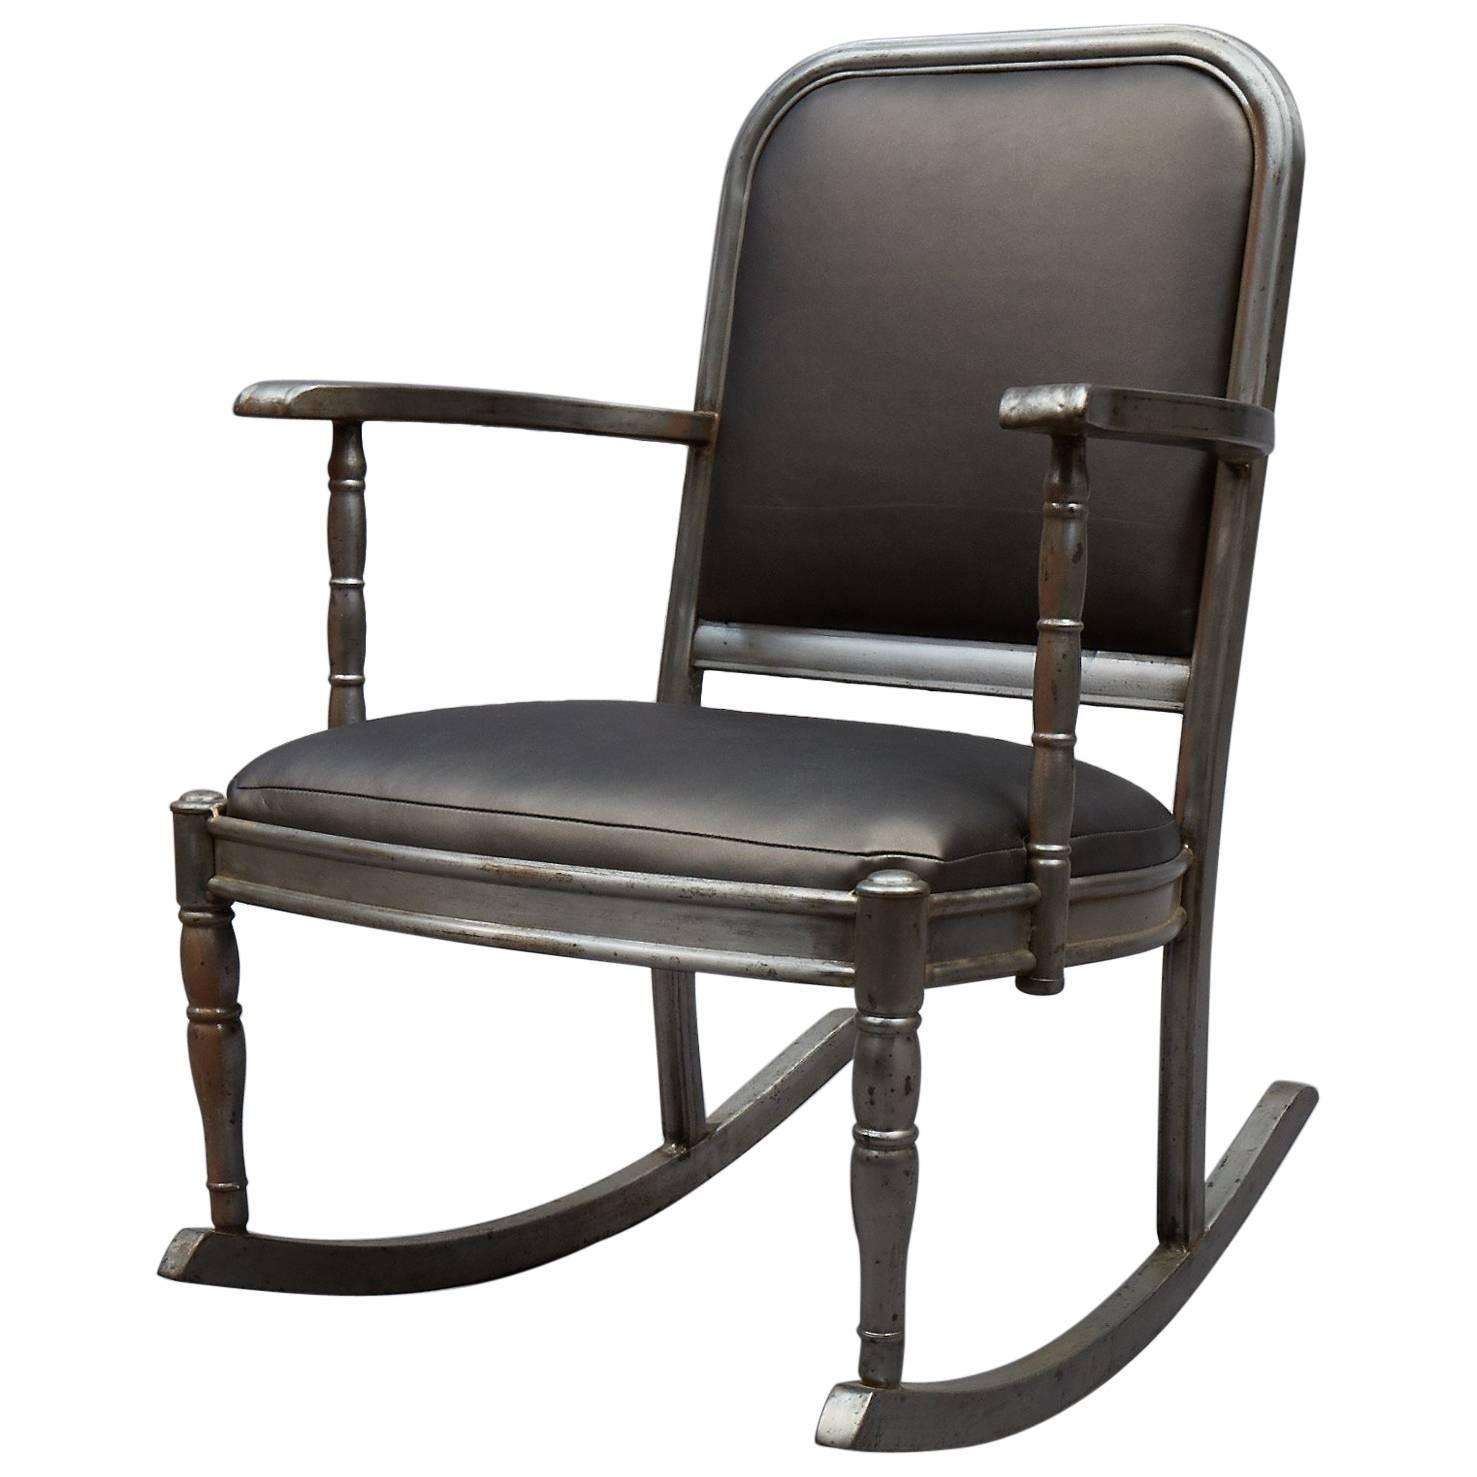 Simmons Brushed Steel and Gunmetal Vinyl Rocking Chair For Sale